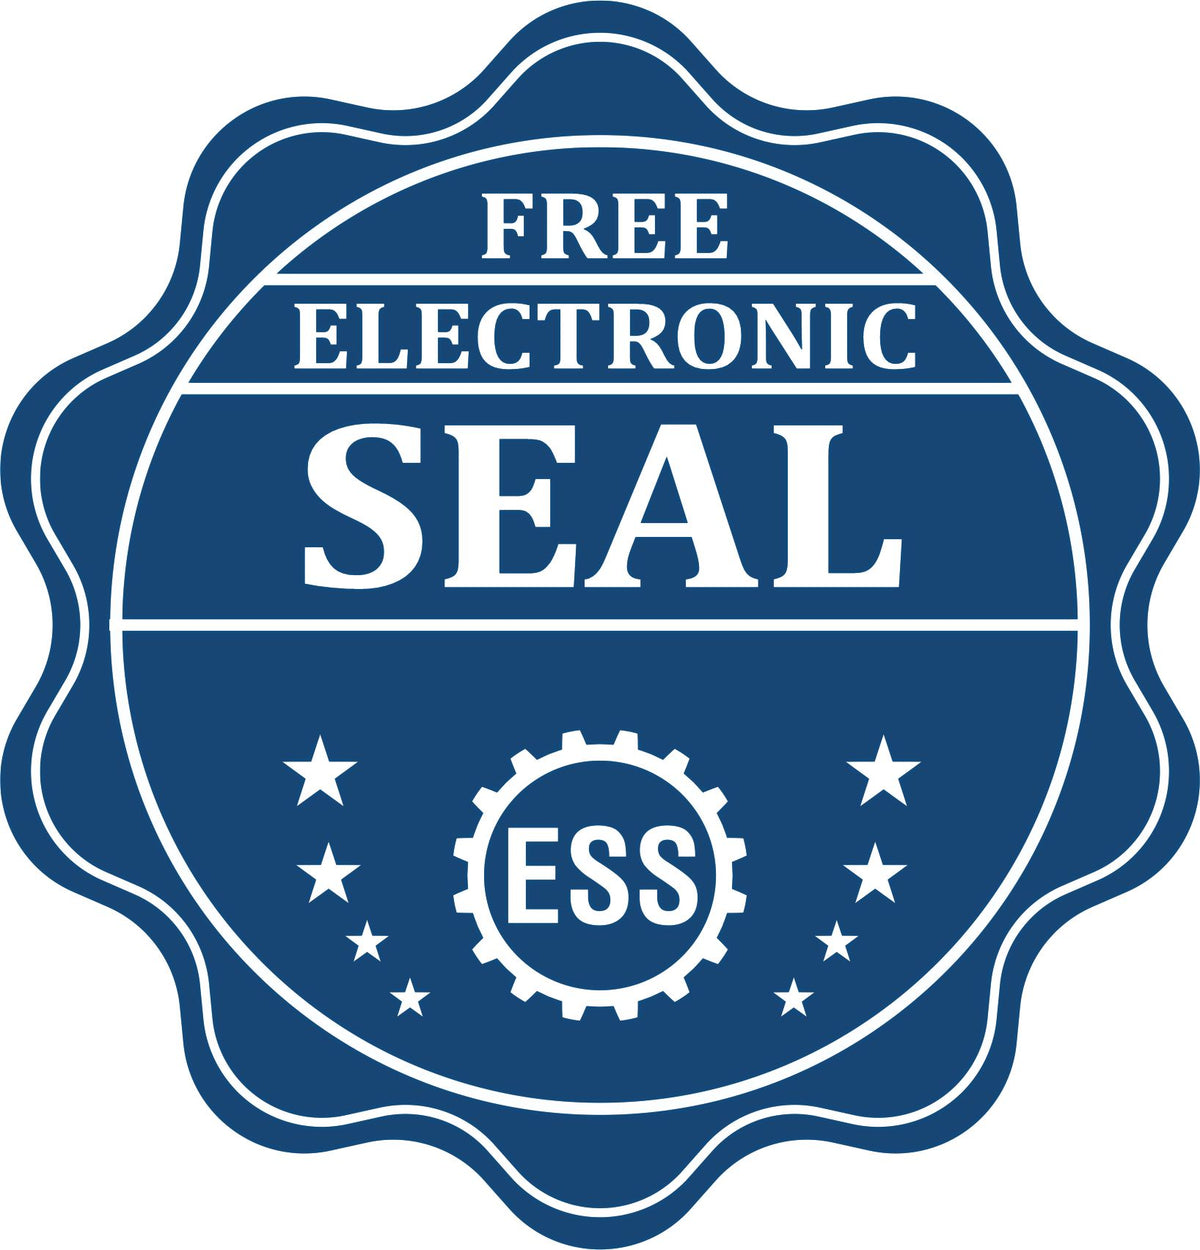 A badge showing a free electronic seal for the Arkansas Desk Surveyor Seal Embosser with stars and the ESS gear on the emblem.